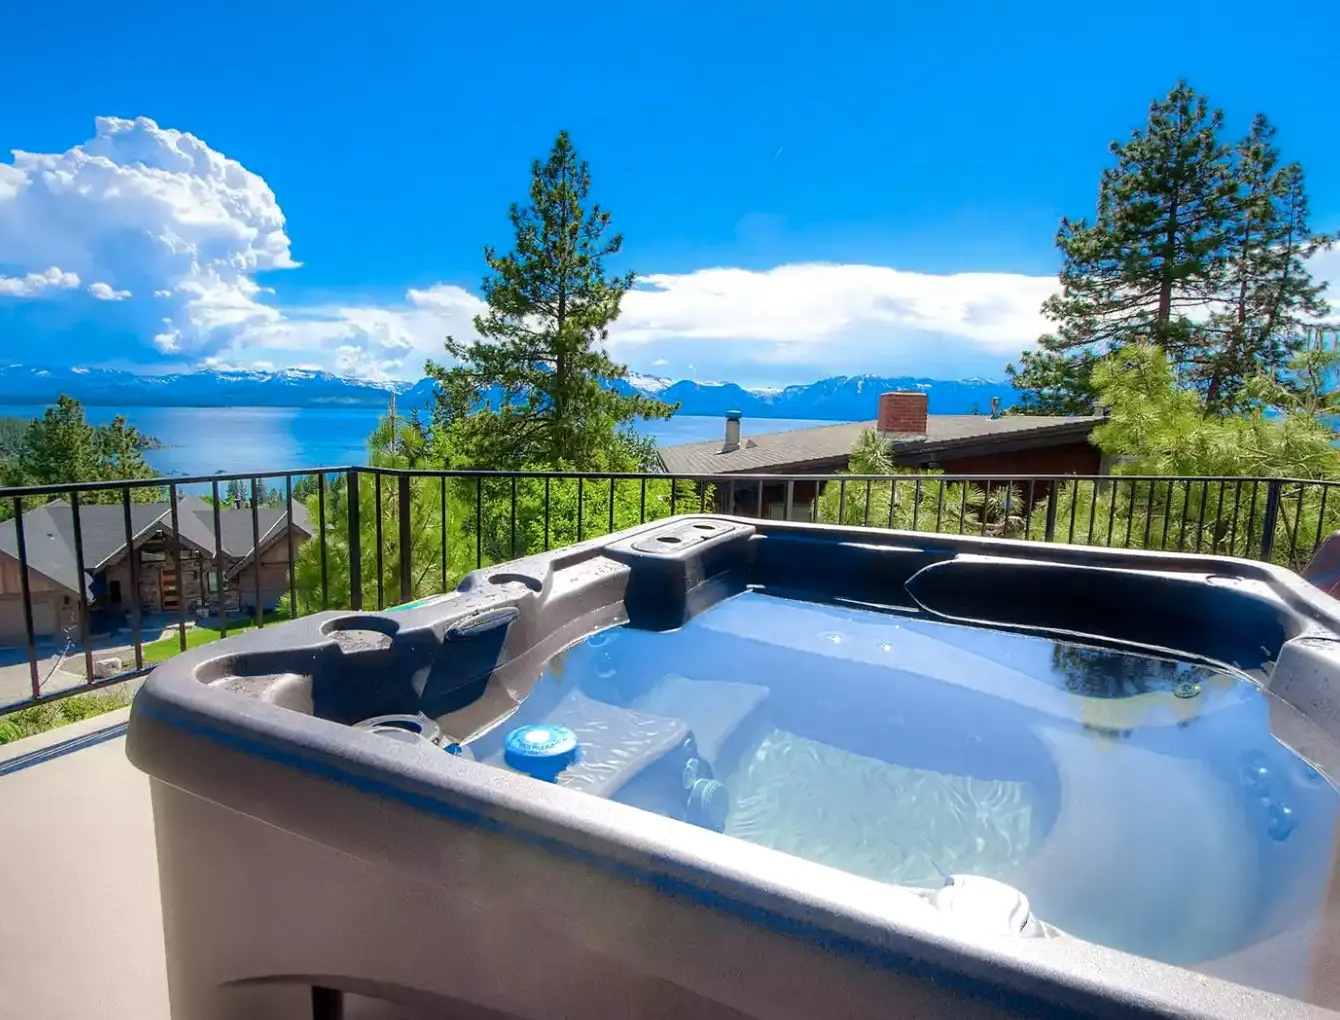 Vacation rental cabin with hot tub overlooking lake tahoe